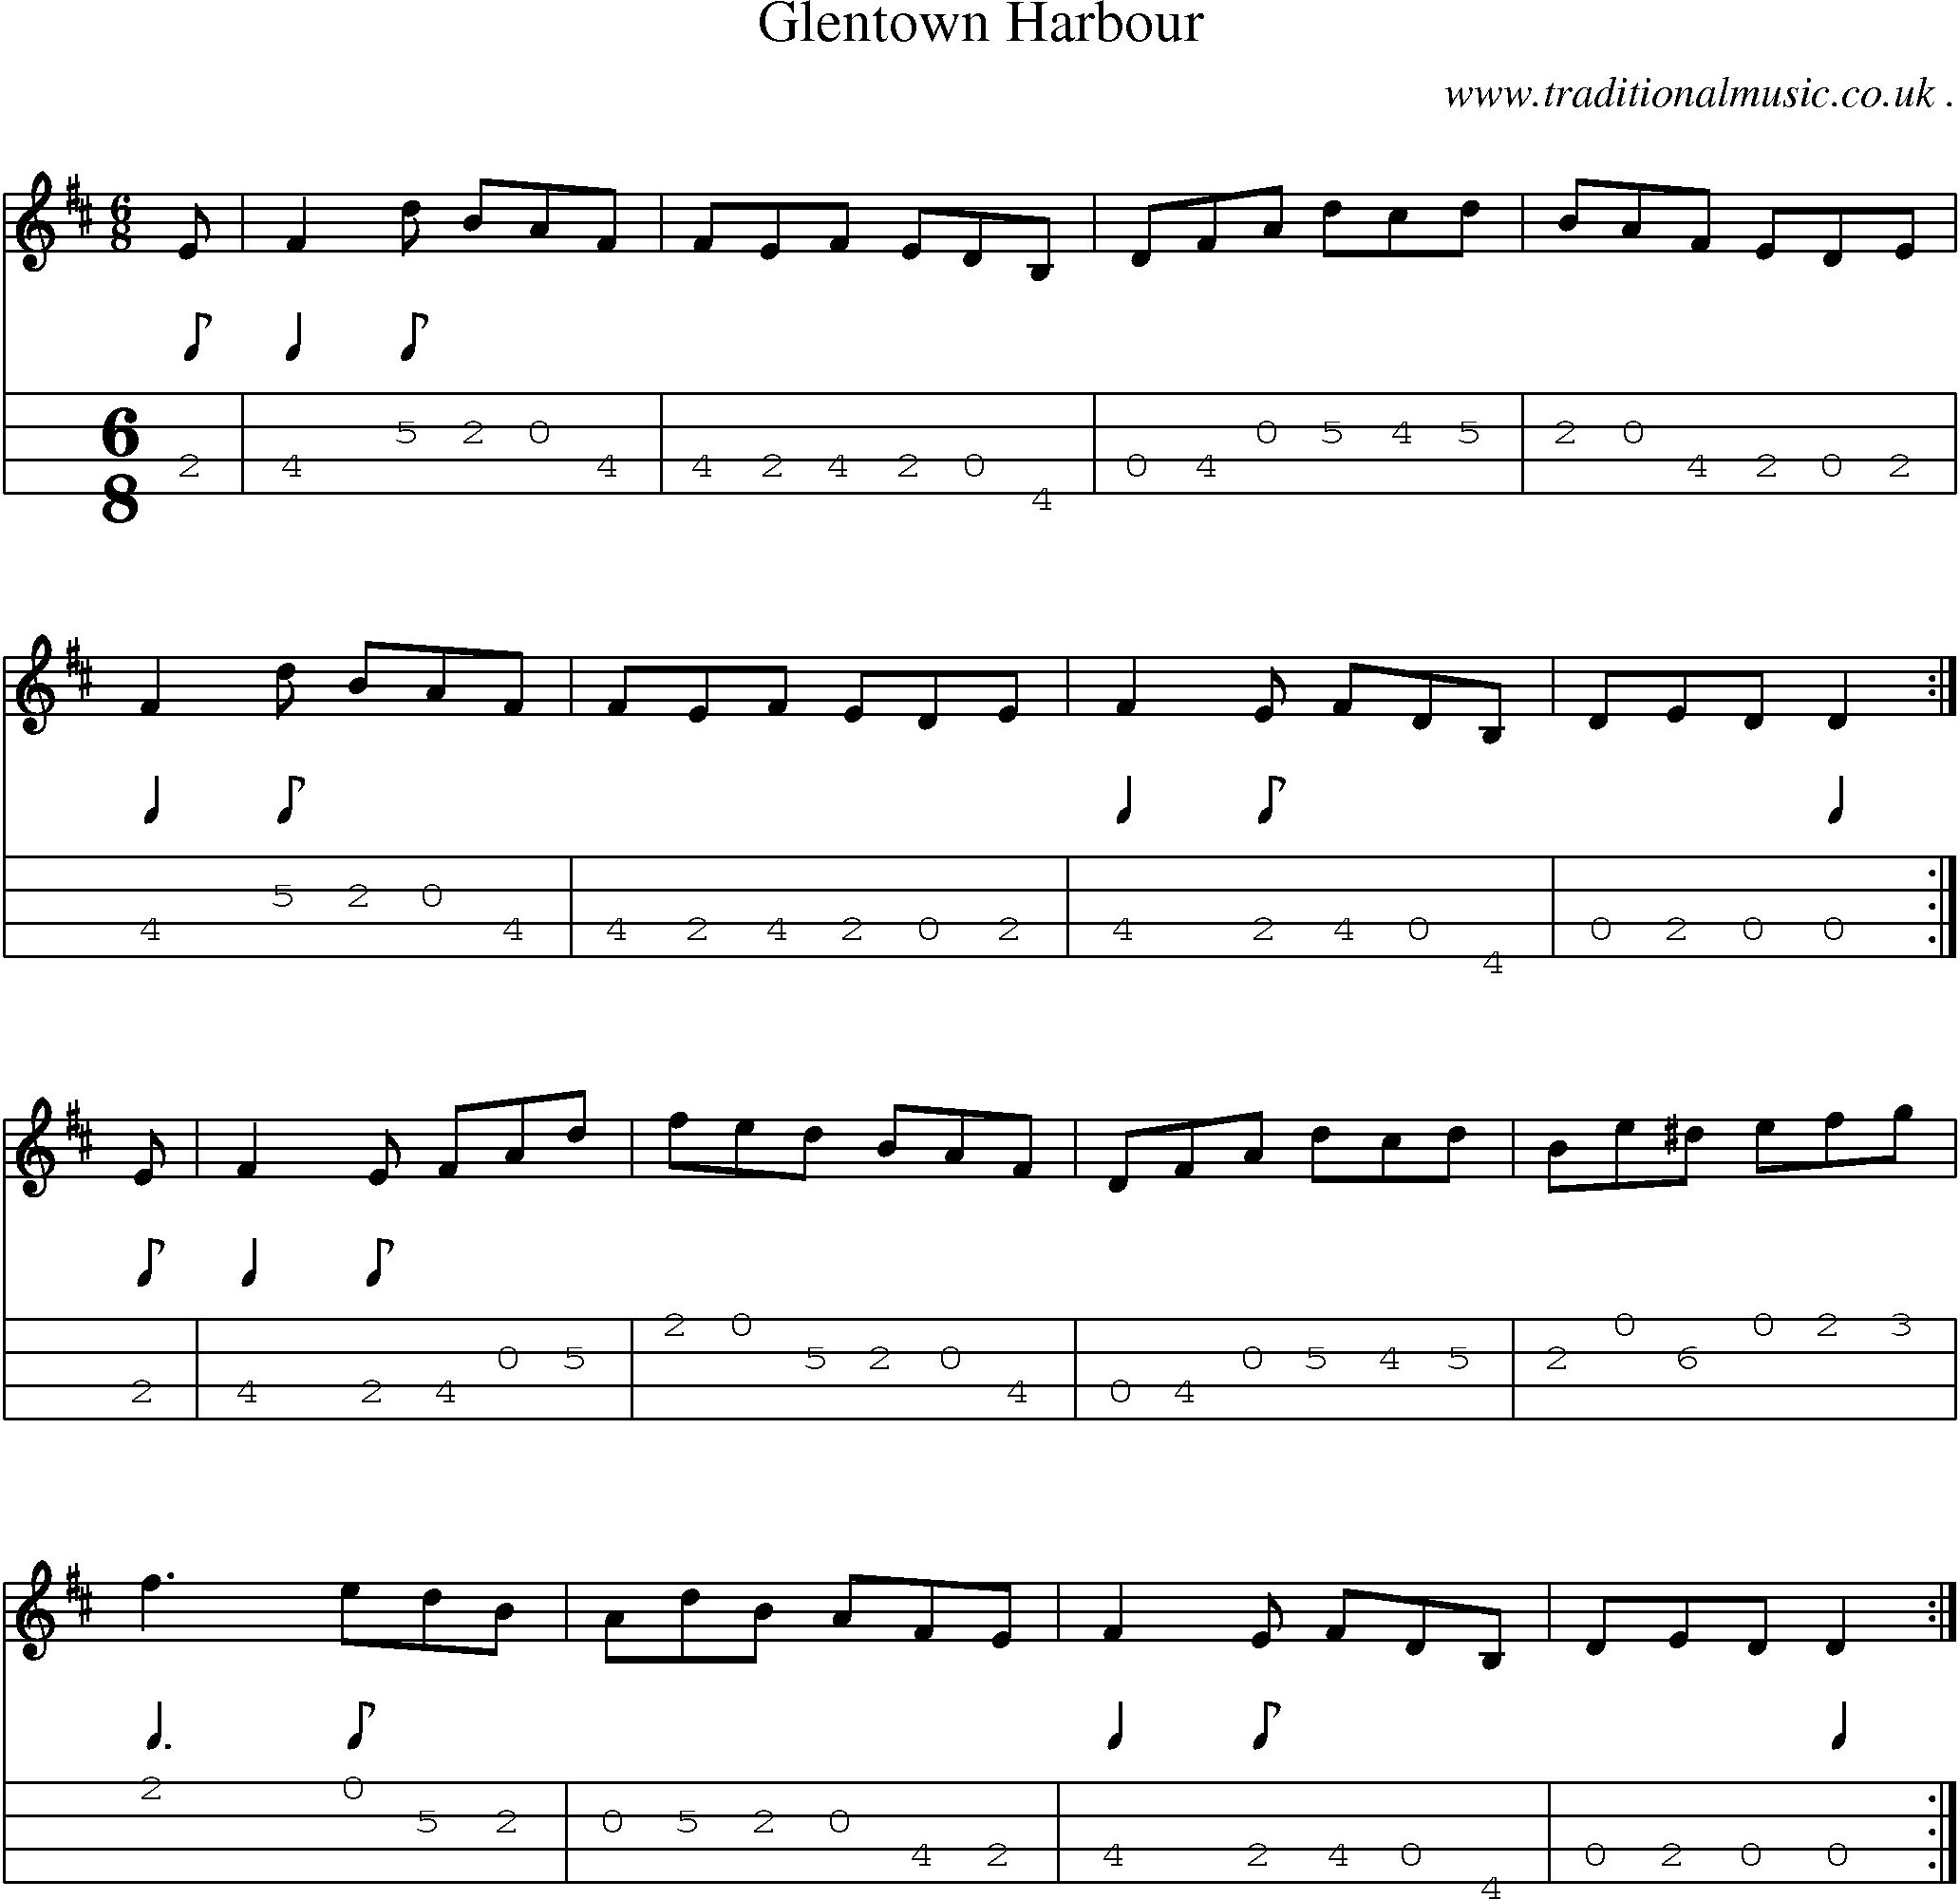 Sheet-music  score, Chords and Mandolin Tabs for Glentown Harbour